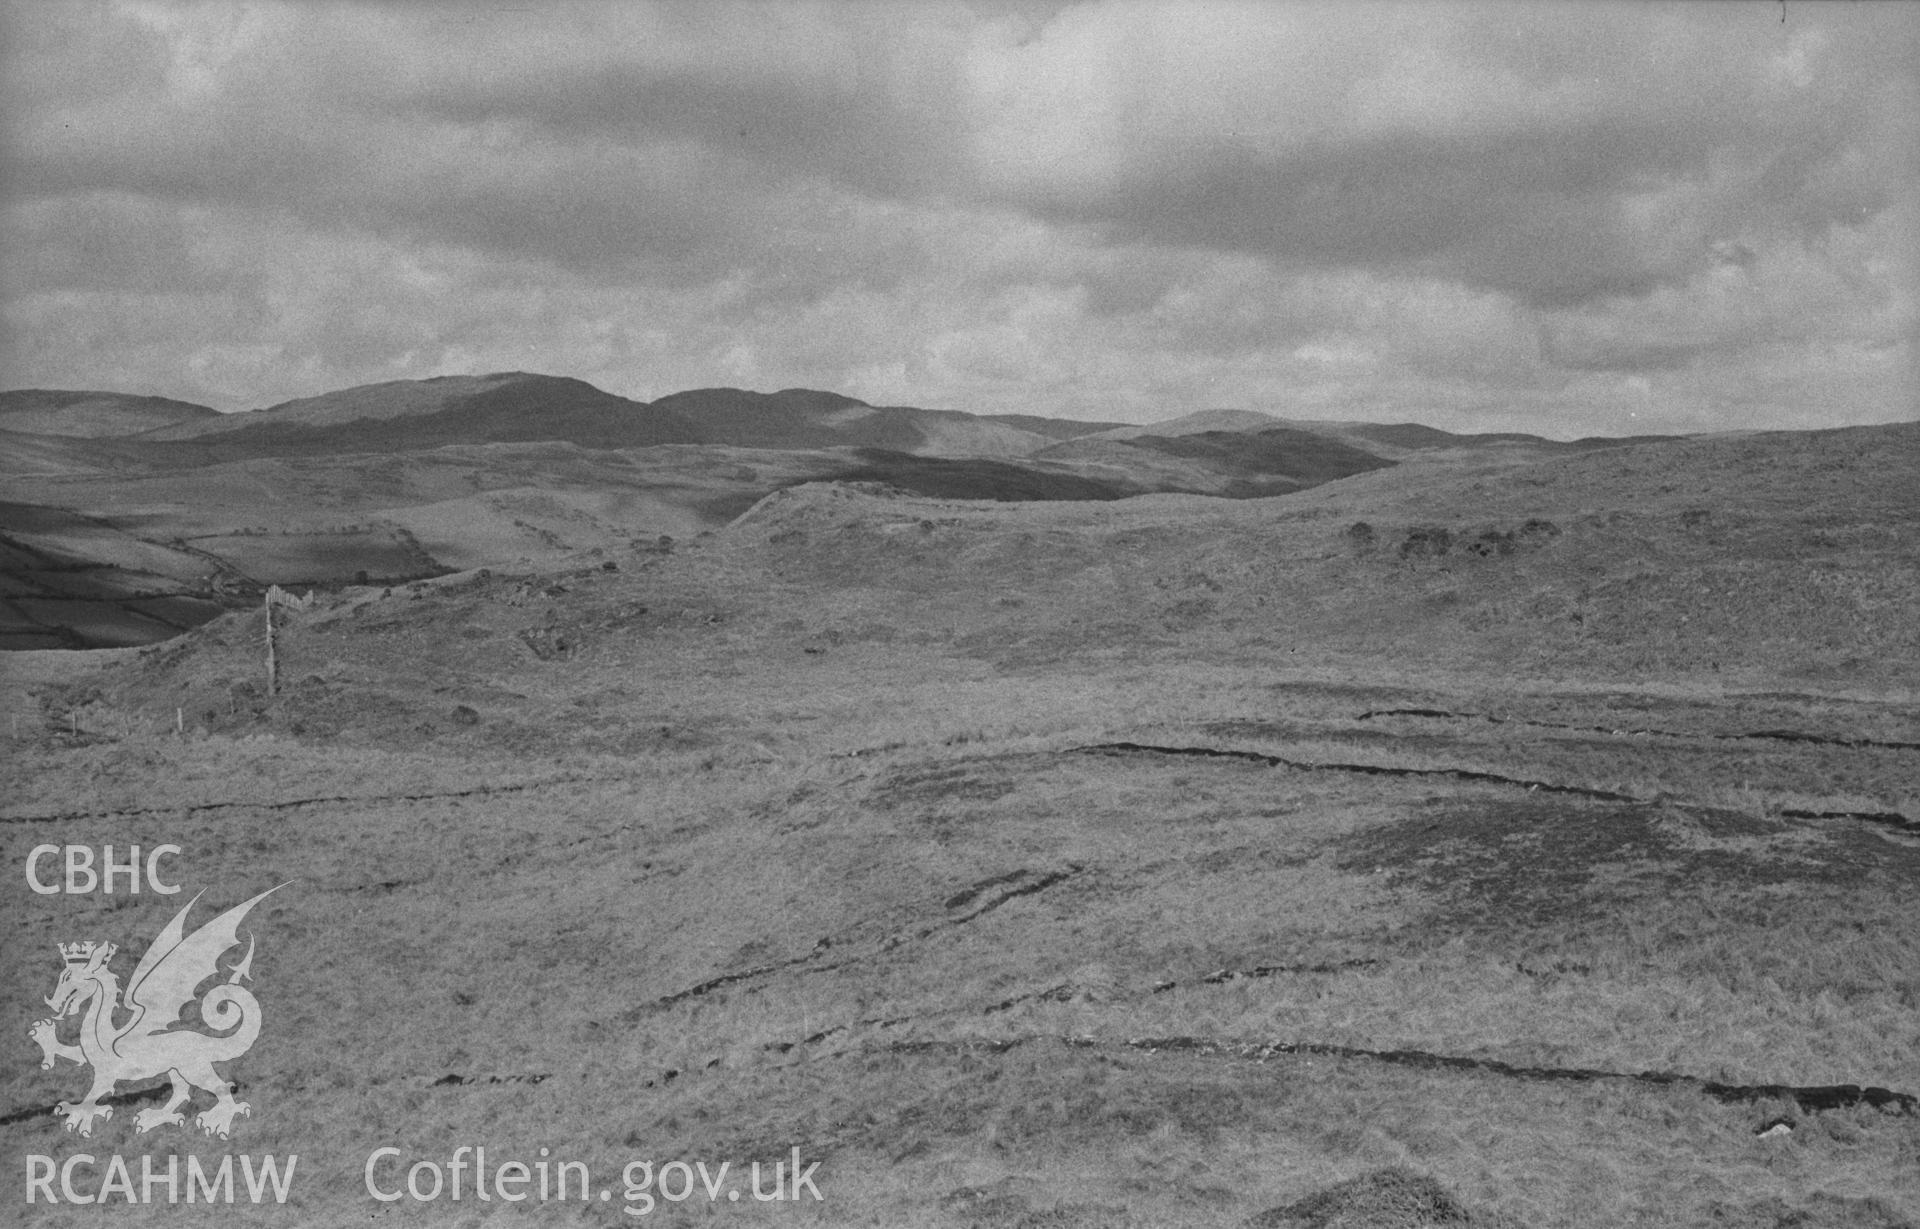 Digital copy of a black and white negative showing northwest corner of Pen Dinas, Elerch. Photographed in April 1963 by Arthur O. Chater from Grid Reference SN 6764 8767, looking north north east.